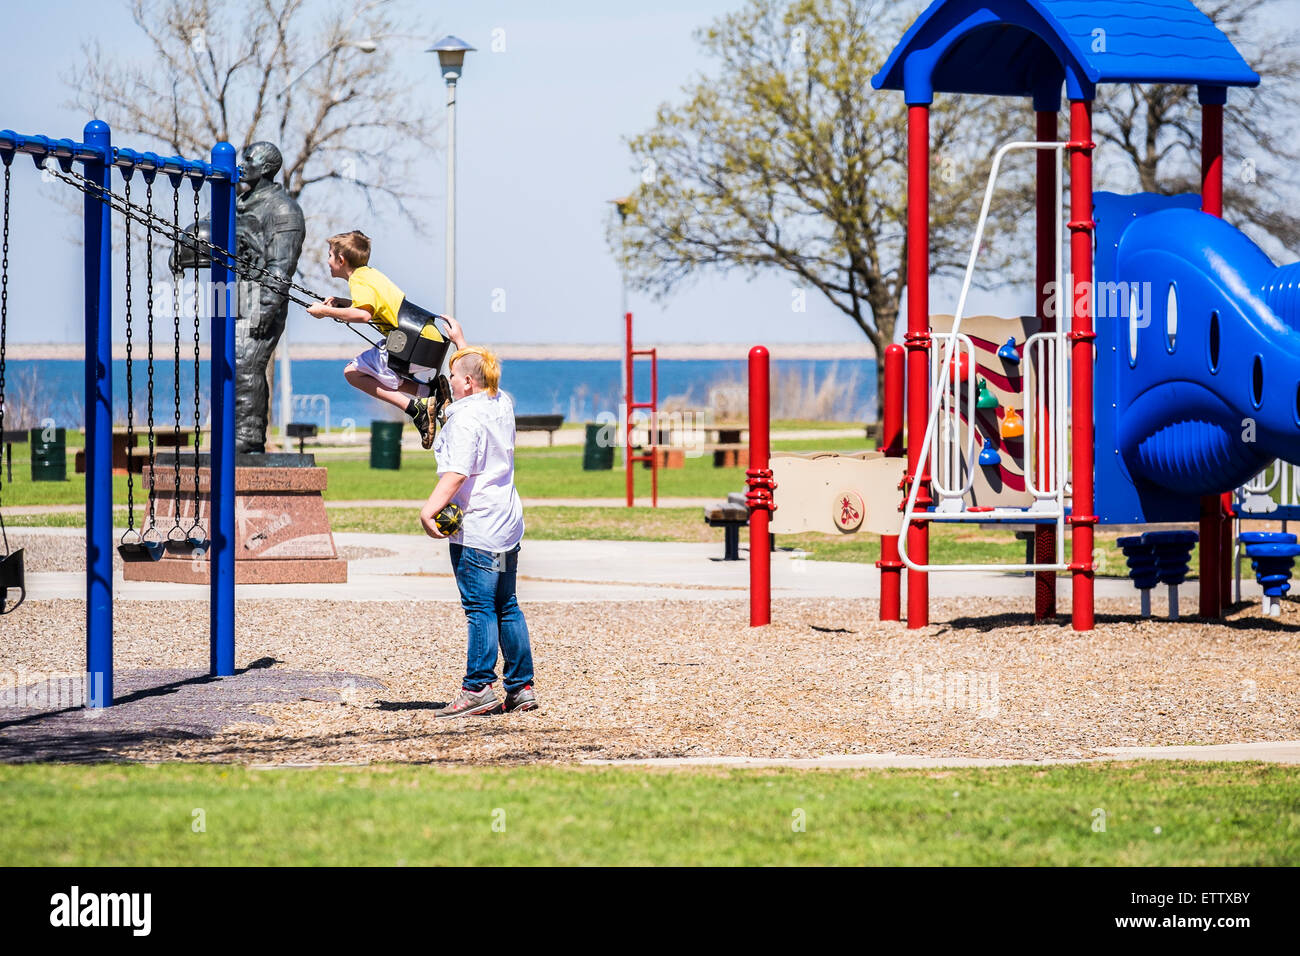 A teenage boy with a funky haircut swings a younger boy in a public playground. Oklahoma City, Oklahoma, USA. Stock Photo